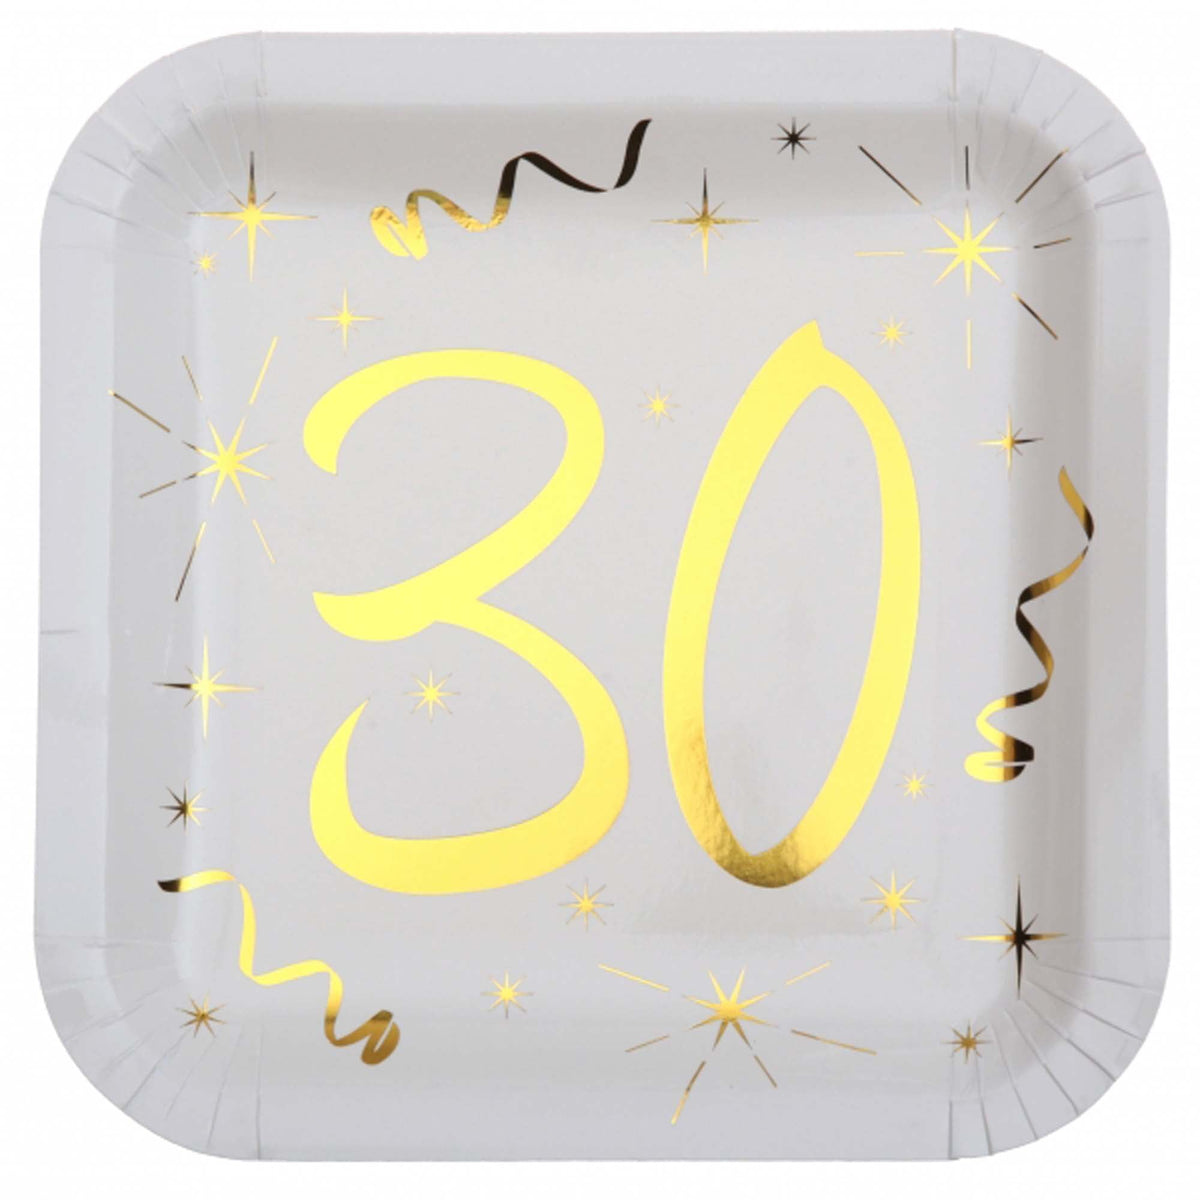 SANTEX General Birthday Starry Golden Age 30th Birthday Large Square Lunch Paper Plates, 9 Inches, 10 Count 3660380040392